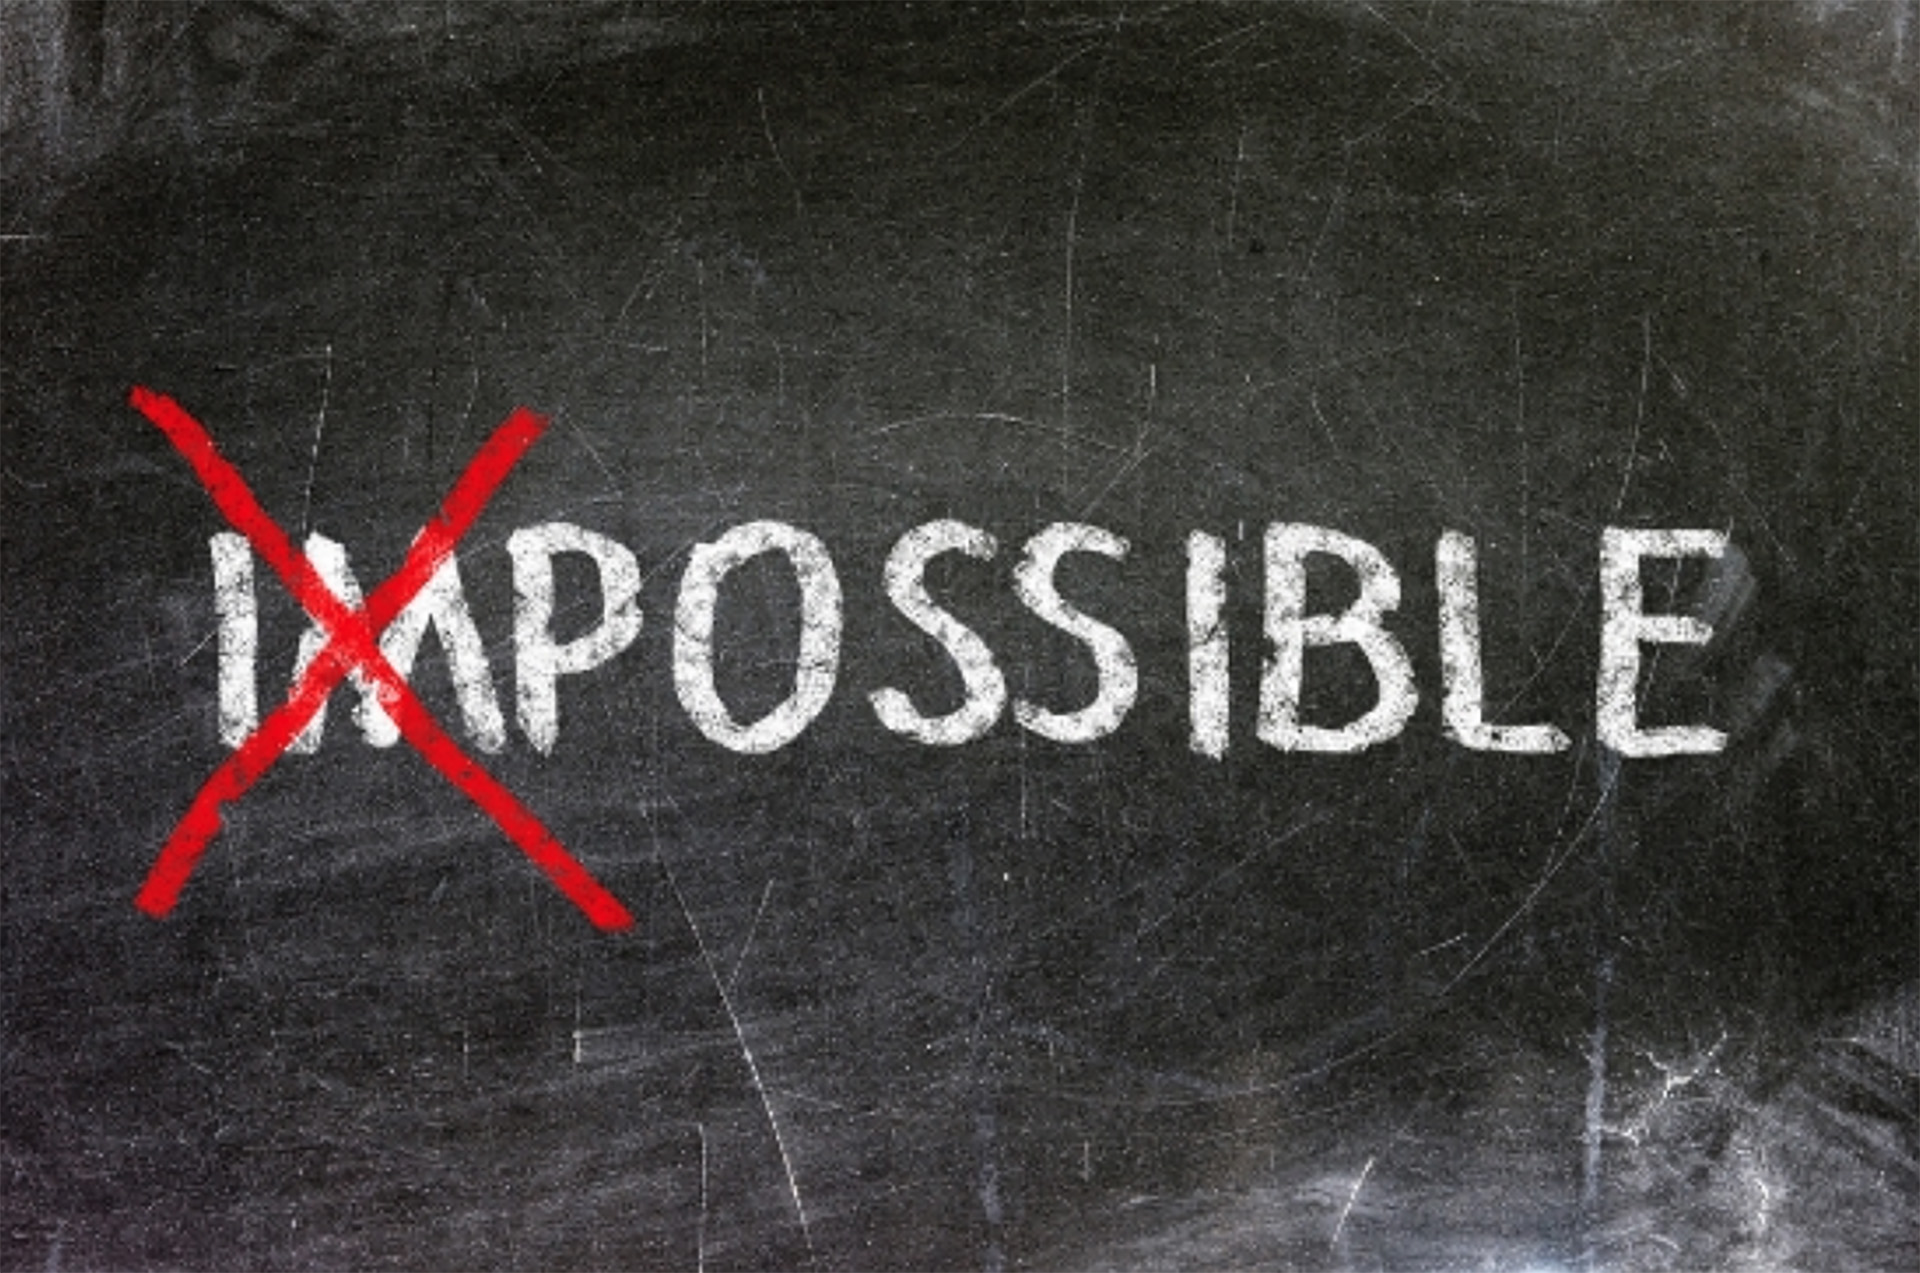 The simplest possible. Impossible. Impossible картинки. Impossible надпись. Картинка Impossible possible.